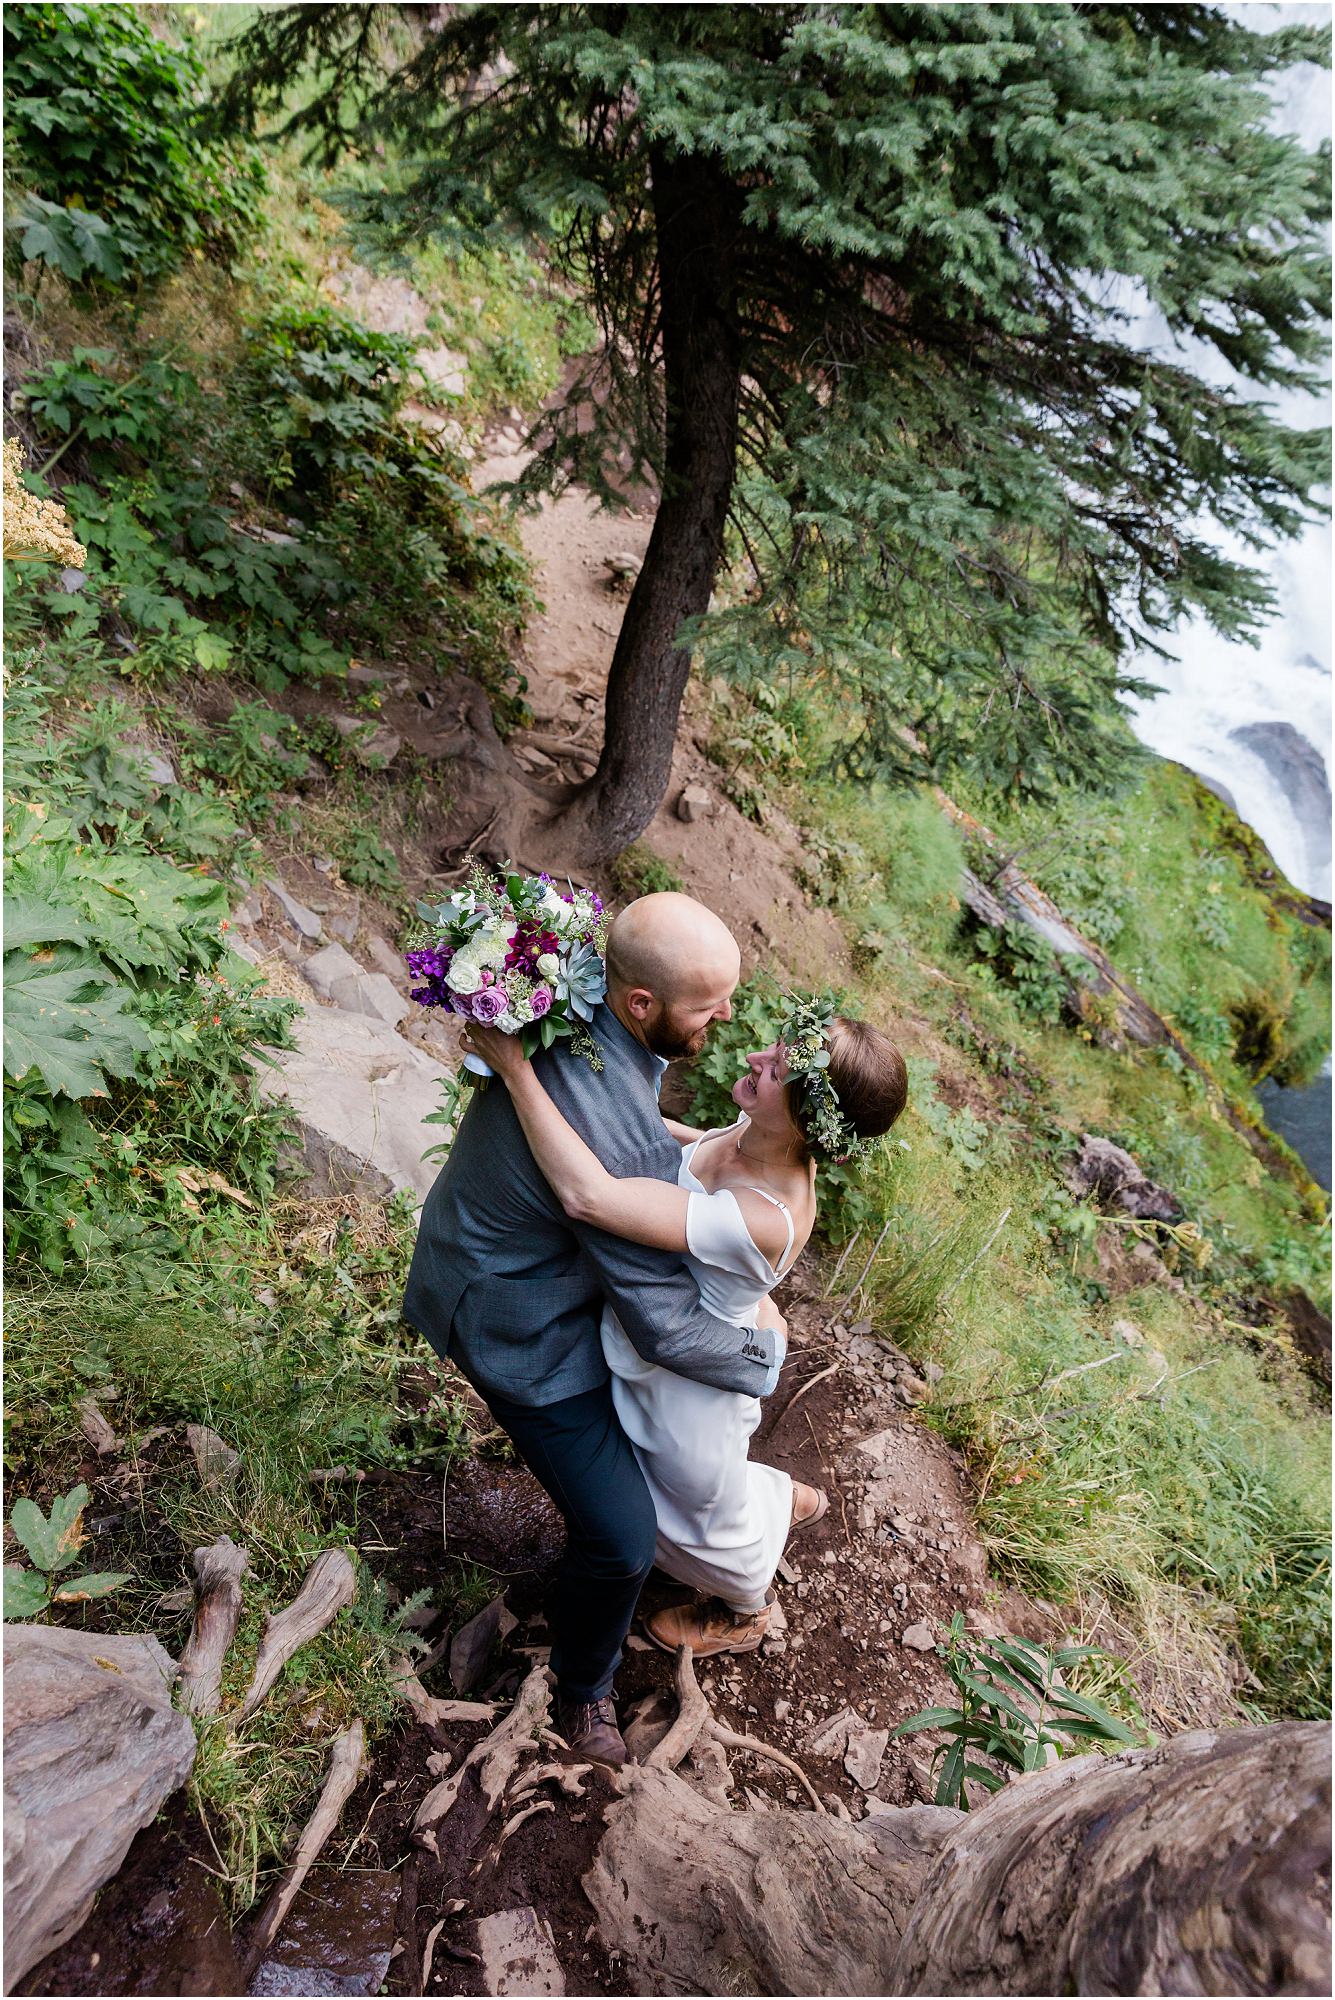 A groom lifts his bride down the steep trail near the waterfall during their adventurous hiking elopement in Bend, OR. | Erica Swantek Photography